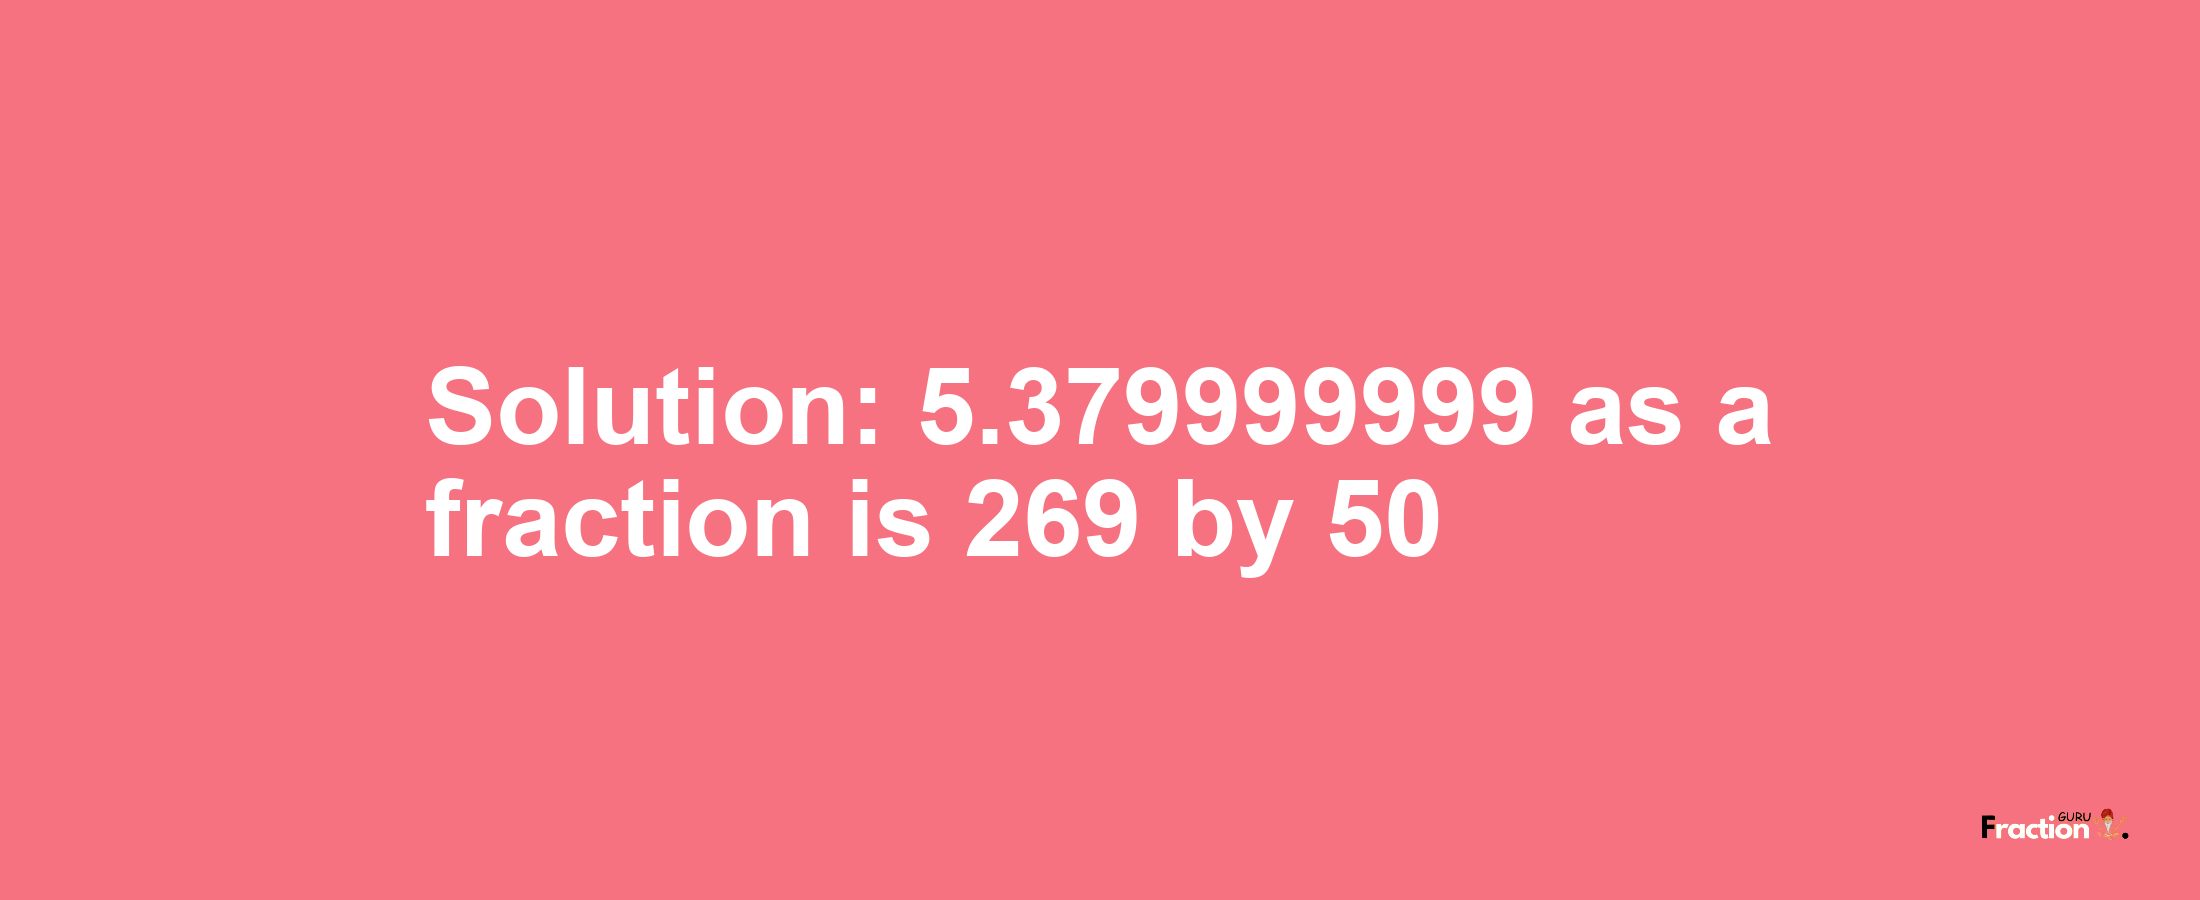 Solution:5.379999999 as a fraction is 269/50